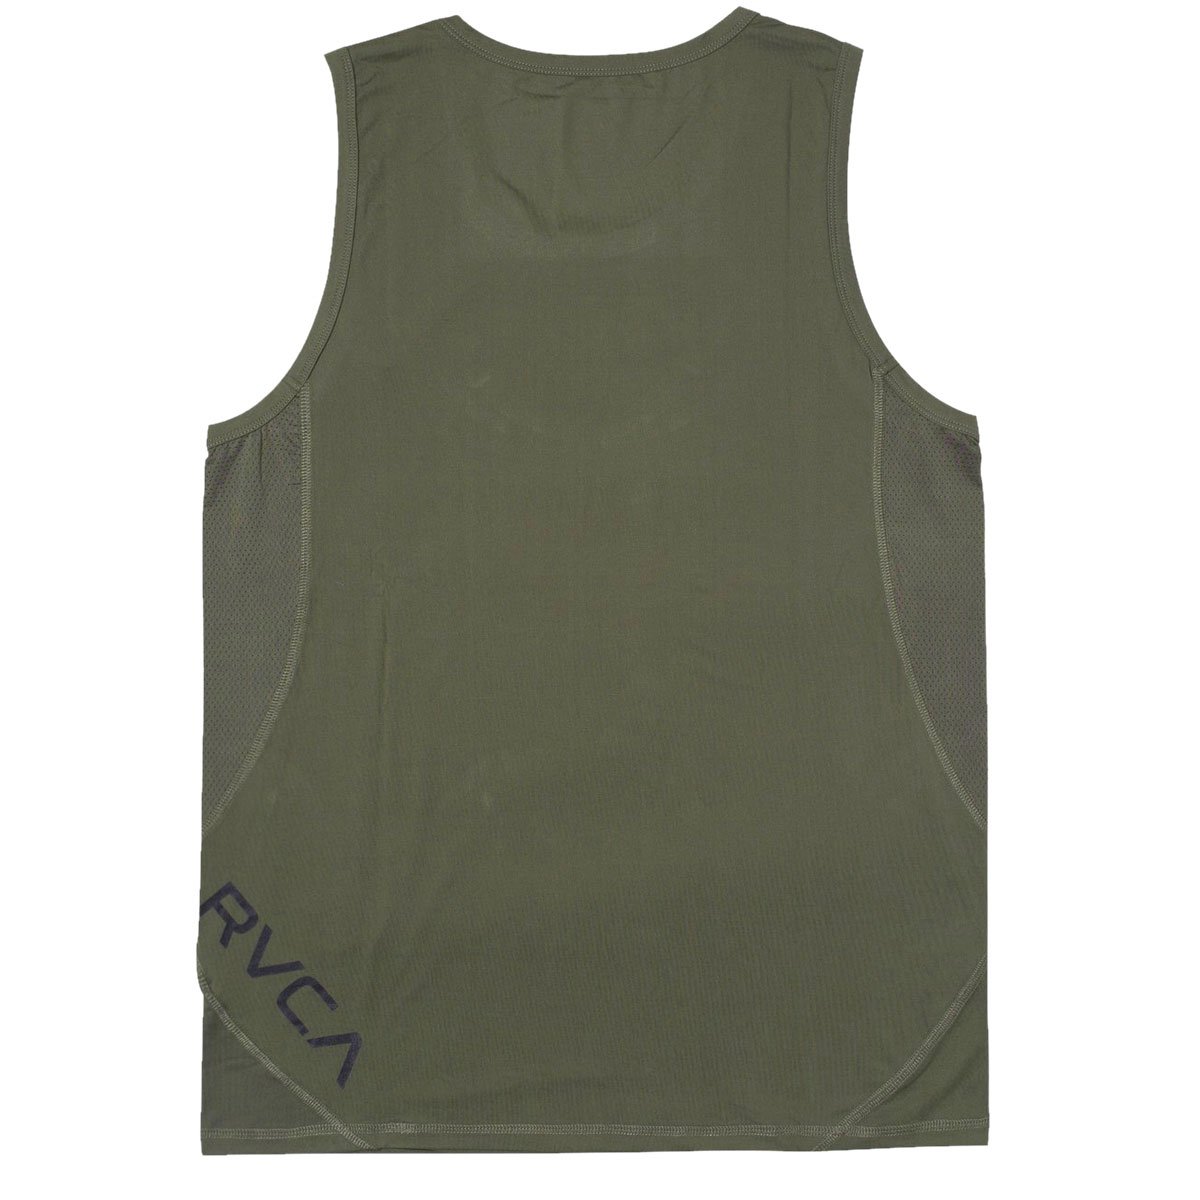 RVCA Sport Vent Sleeve Tank Top - Olive image 2